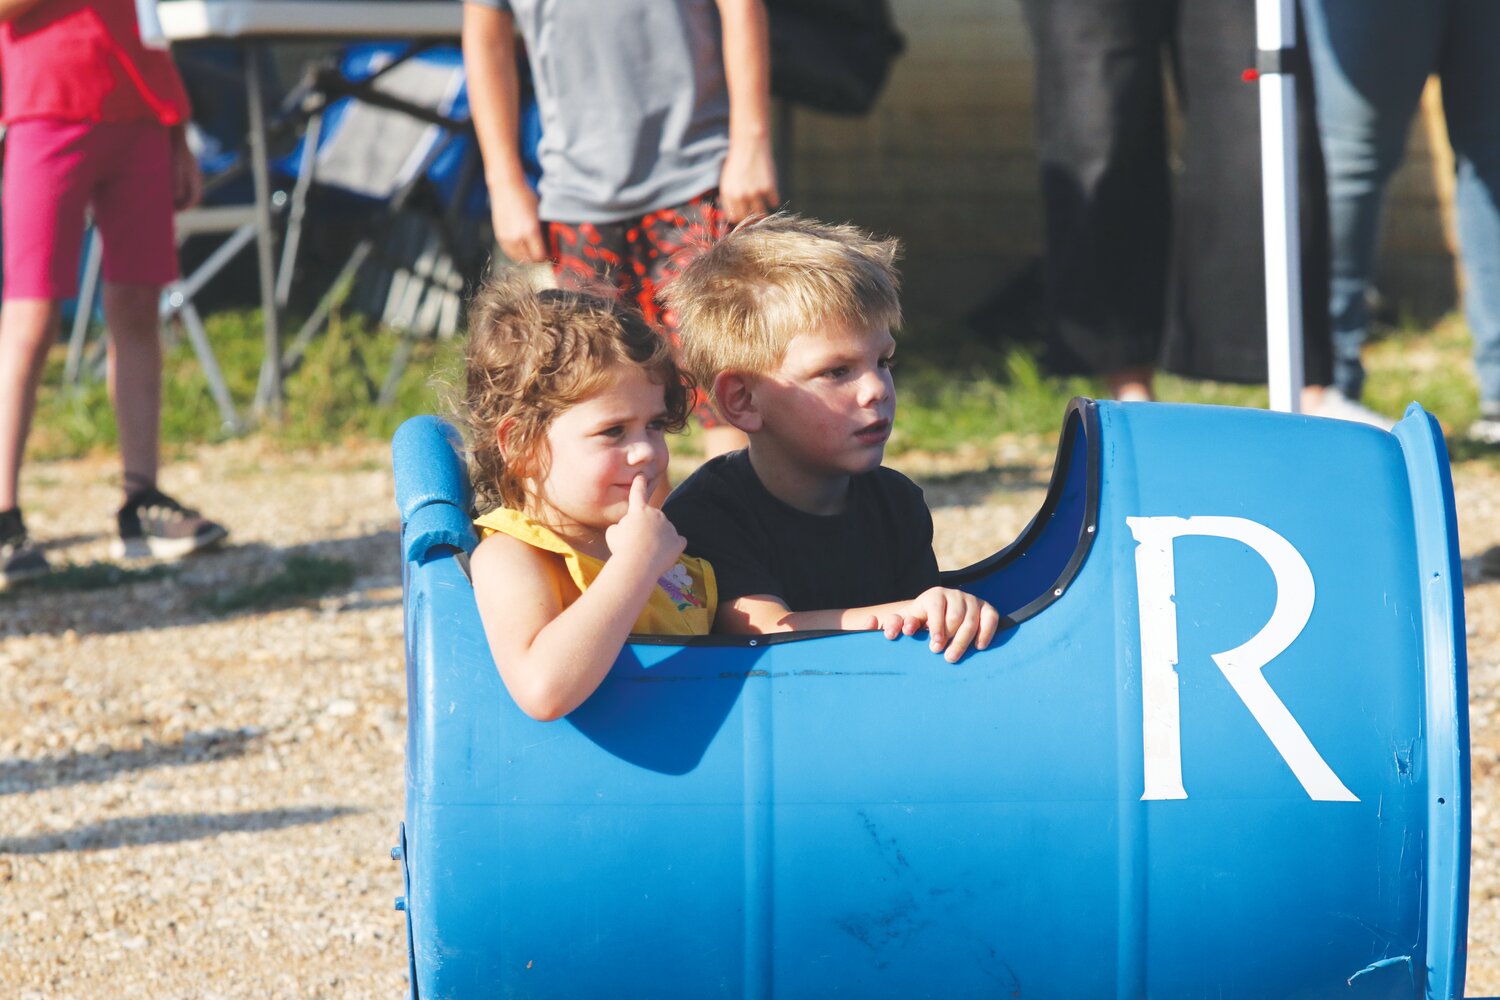 Children of all ages enjoyed games, booths and food on Monday during Kids Night, part of the Madison County IPRA Rodeo Week. The rodeo will take place on Friday and Saturday at Sky High Arena, atop Governors’ Hill in Huntsville.